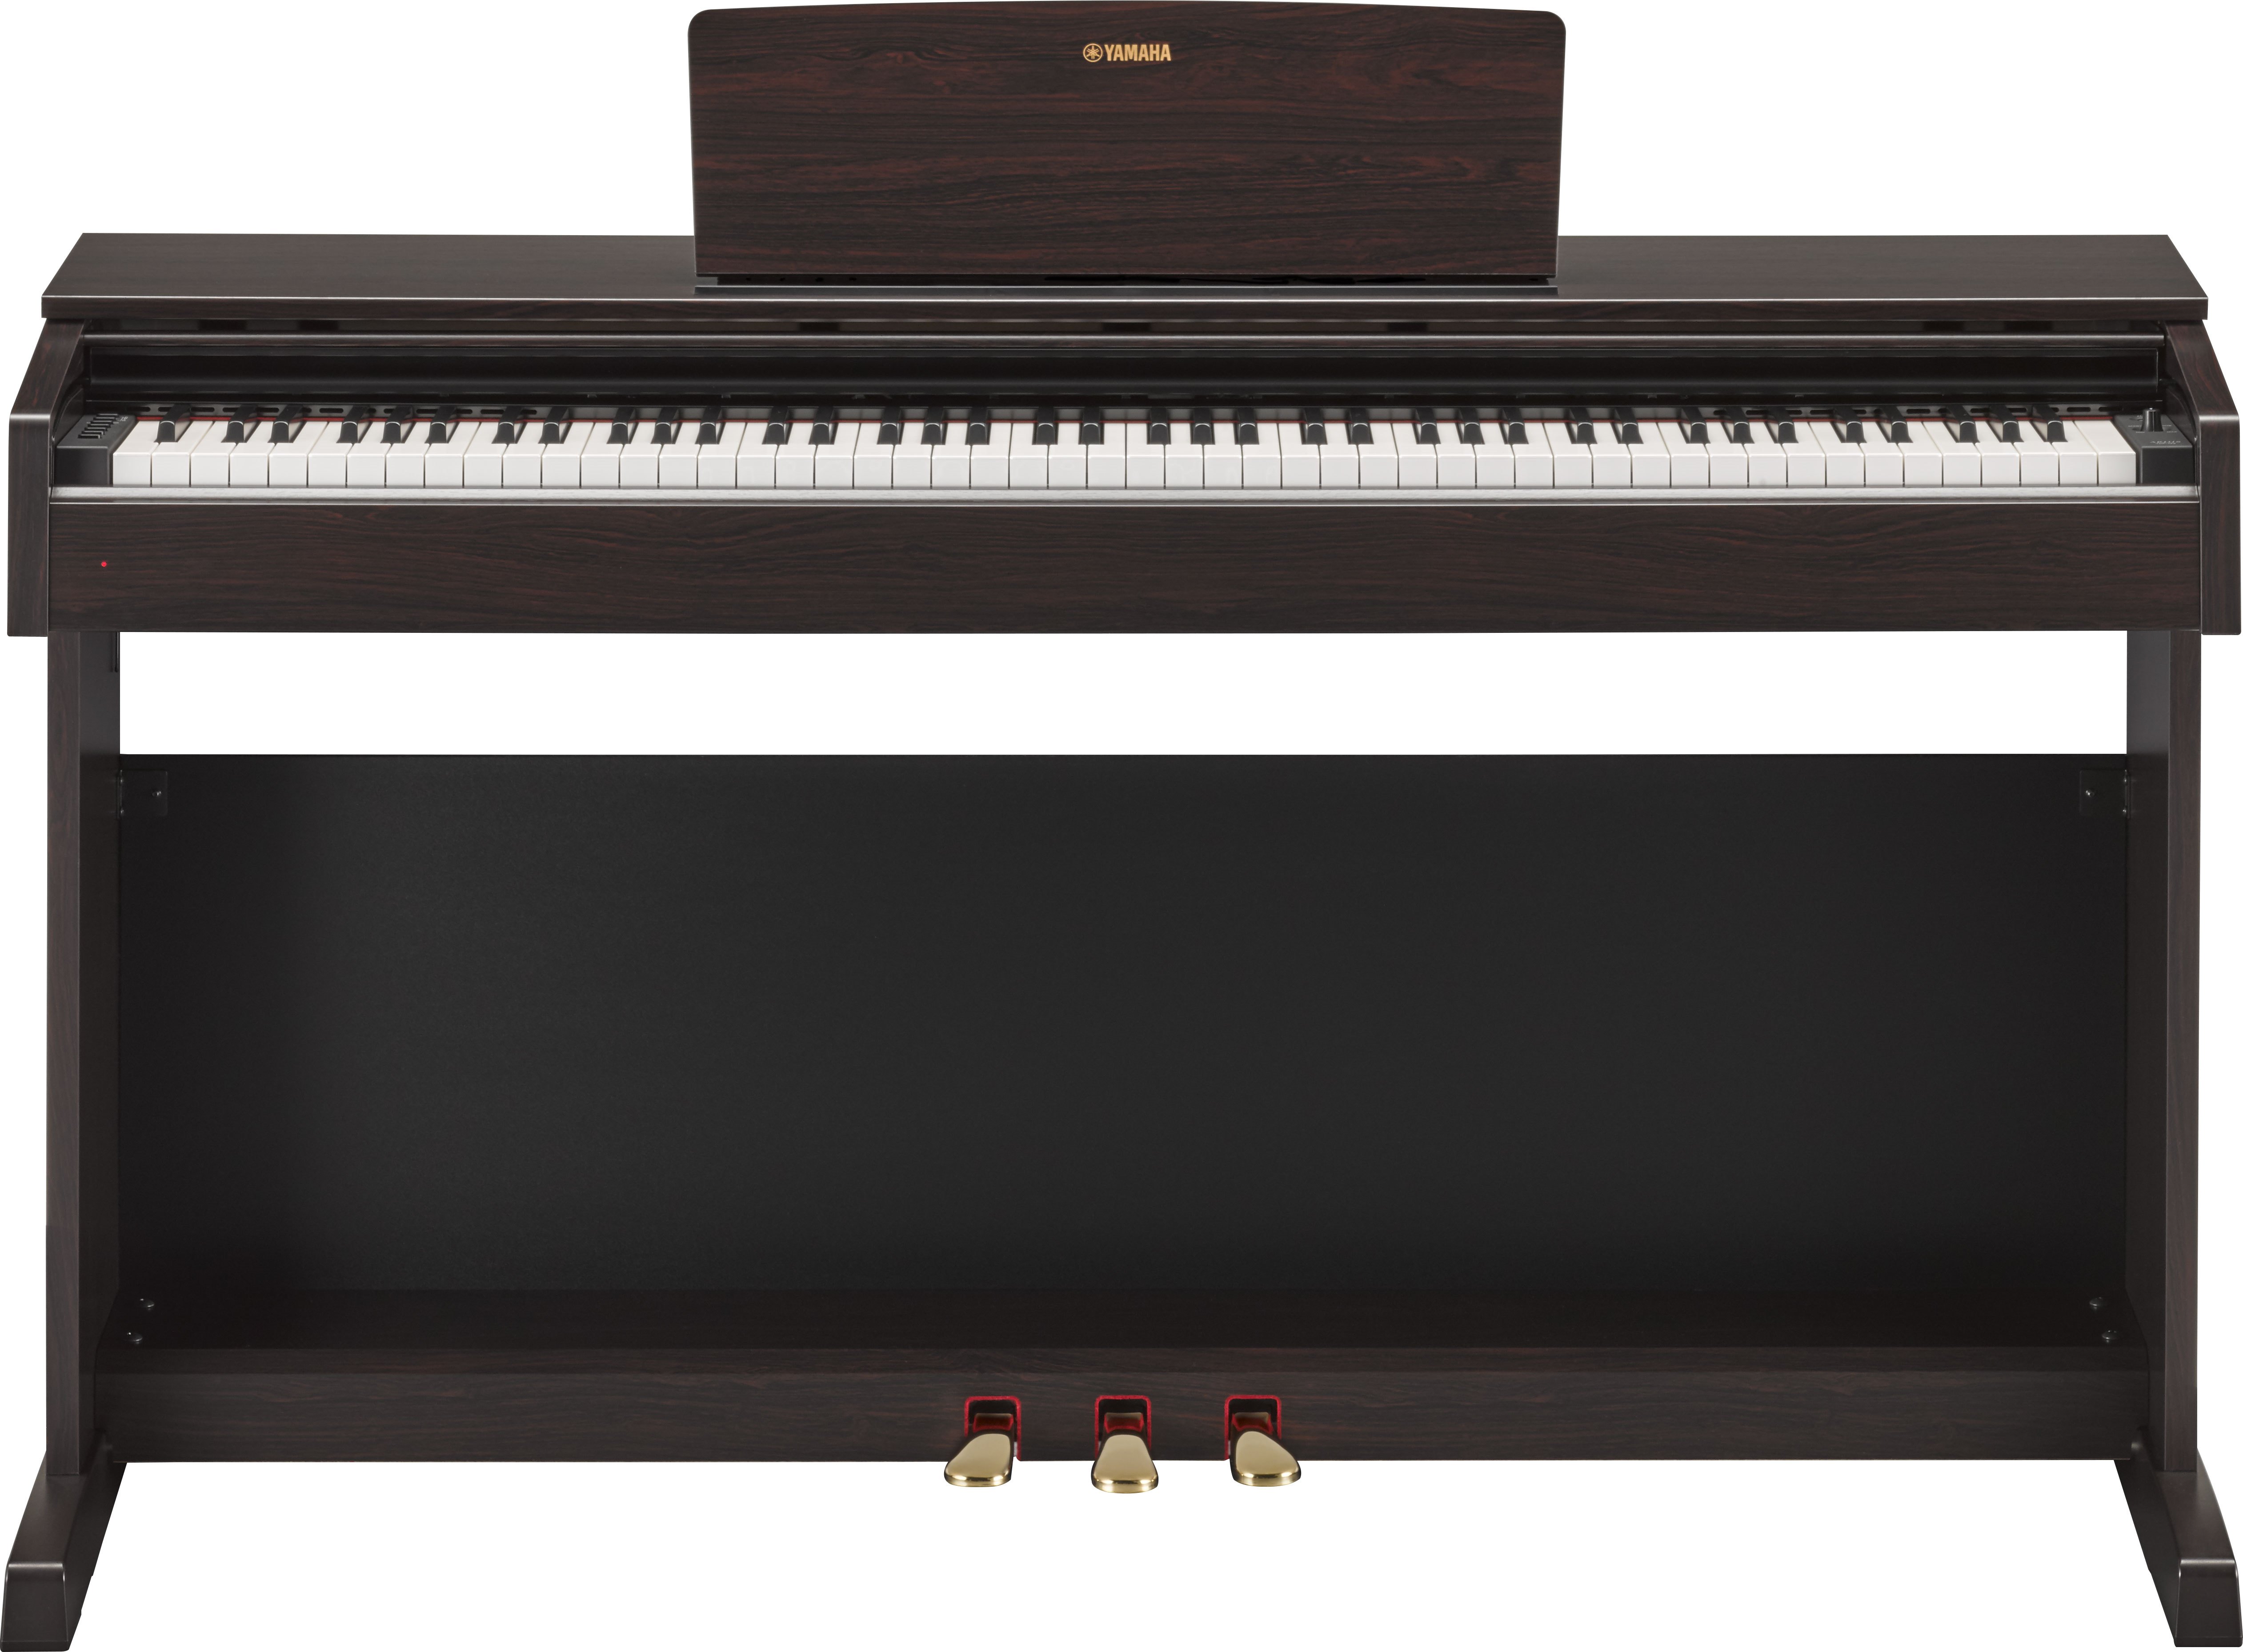 YDP-143 - Overview - ARIUS - Pianos - Musical Instruments 